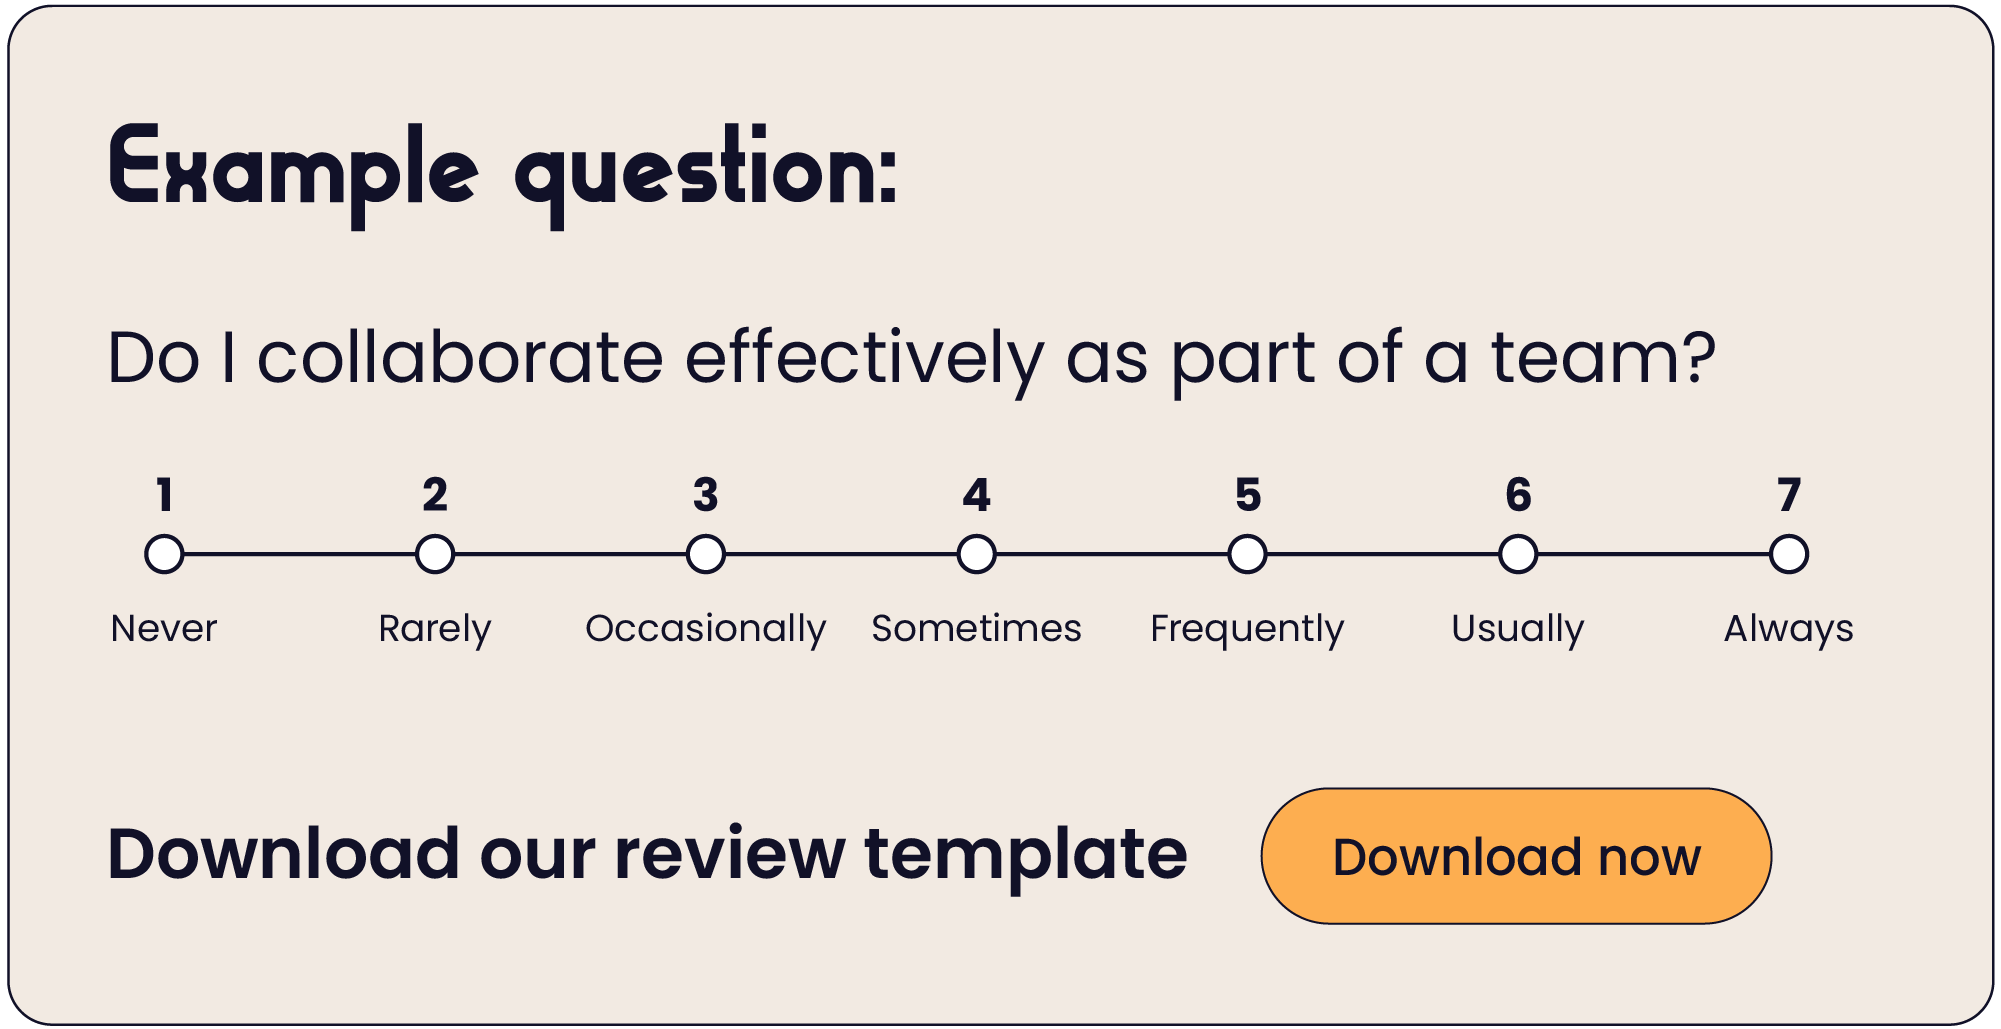 Illustration of a Likert scale. Click to download the template